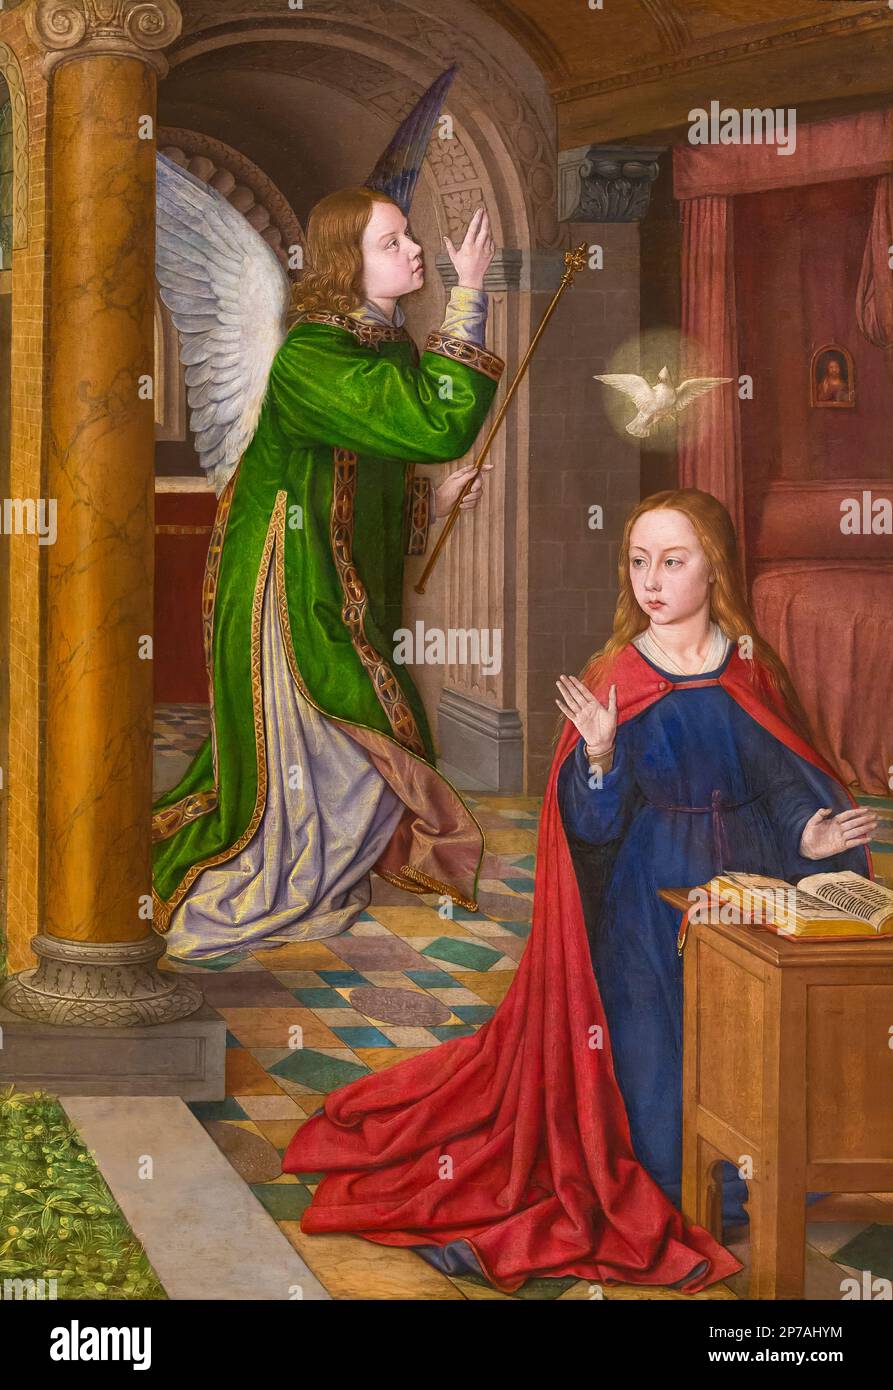 The Annunciation, Jean Hey, Master of Moulins, 1490-1495, Art Institute of Chicago, Chicago, Illinois, USA, North America, Stock Photo